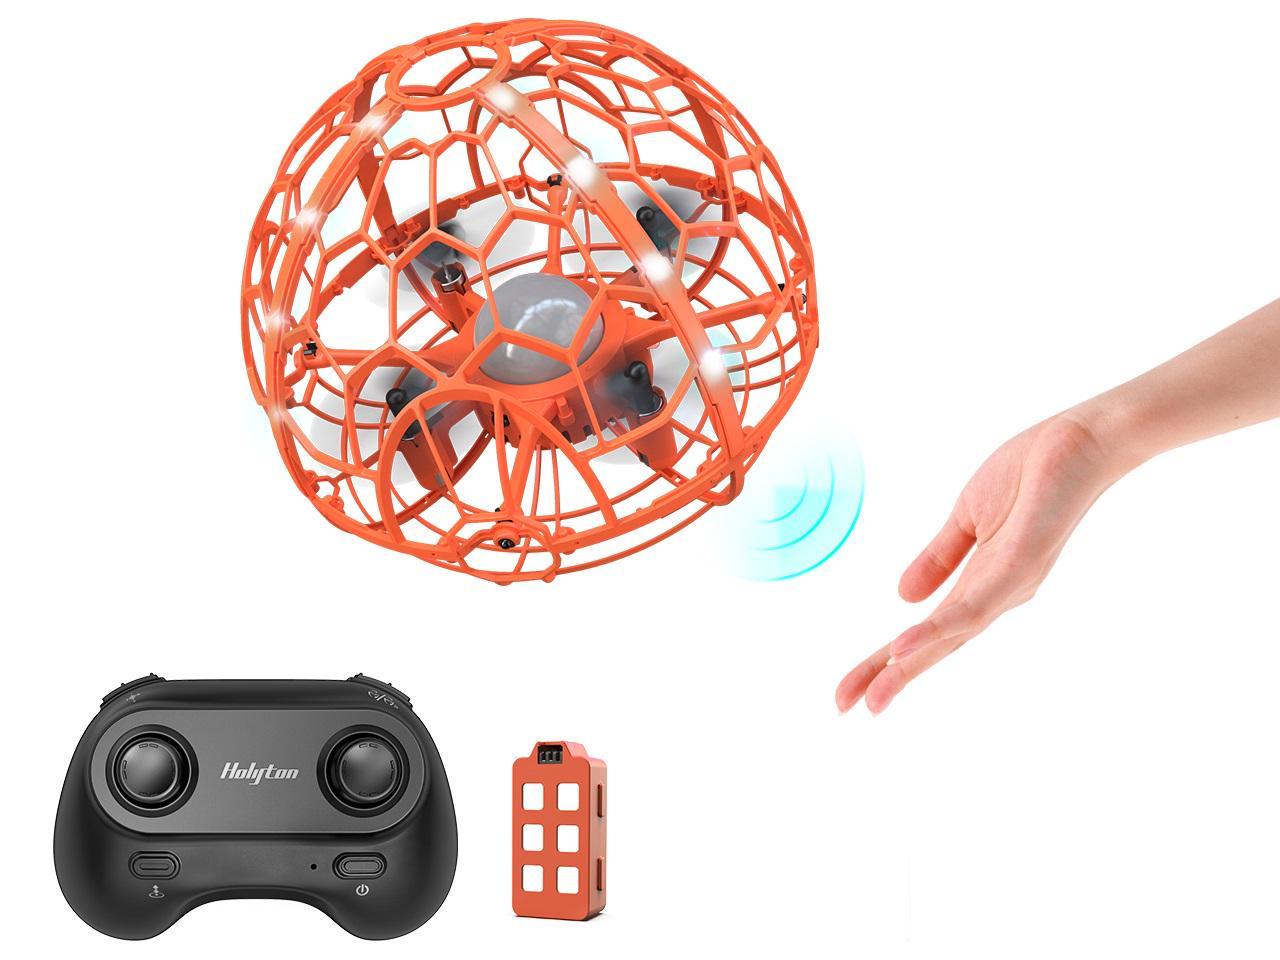 Triple Leap Flying Ball Toys with Fancy Lights for Boys and Girls Surfing Mode Holyton HT06 Drones for Kids or Adults Hand Operated RC Quadcopter with Thrown’ Go Rotation Mode 